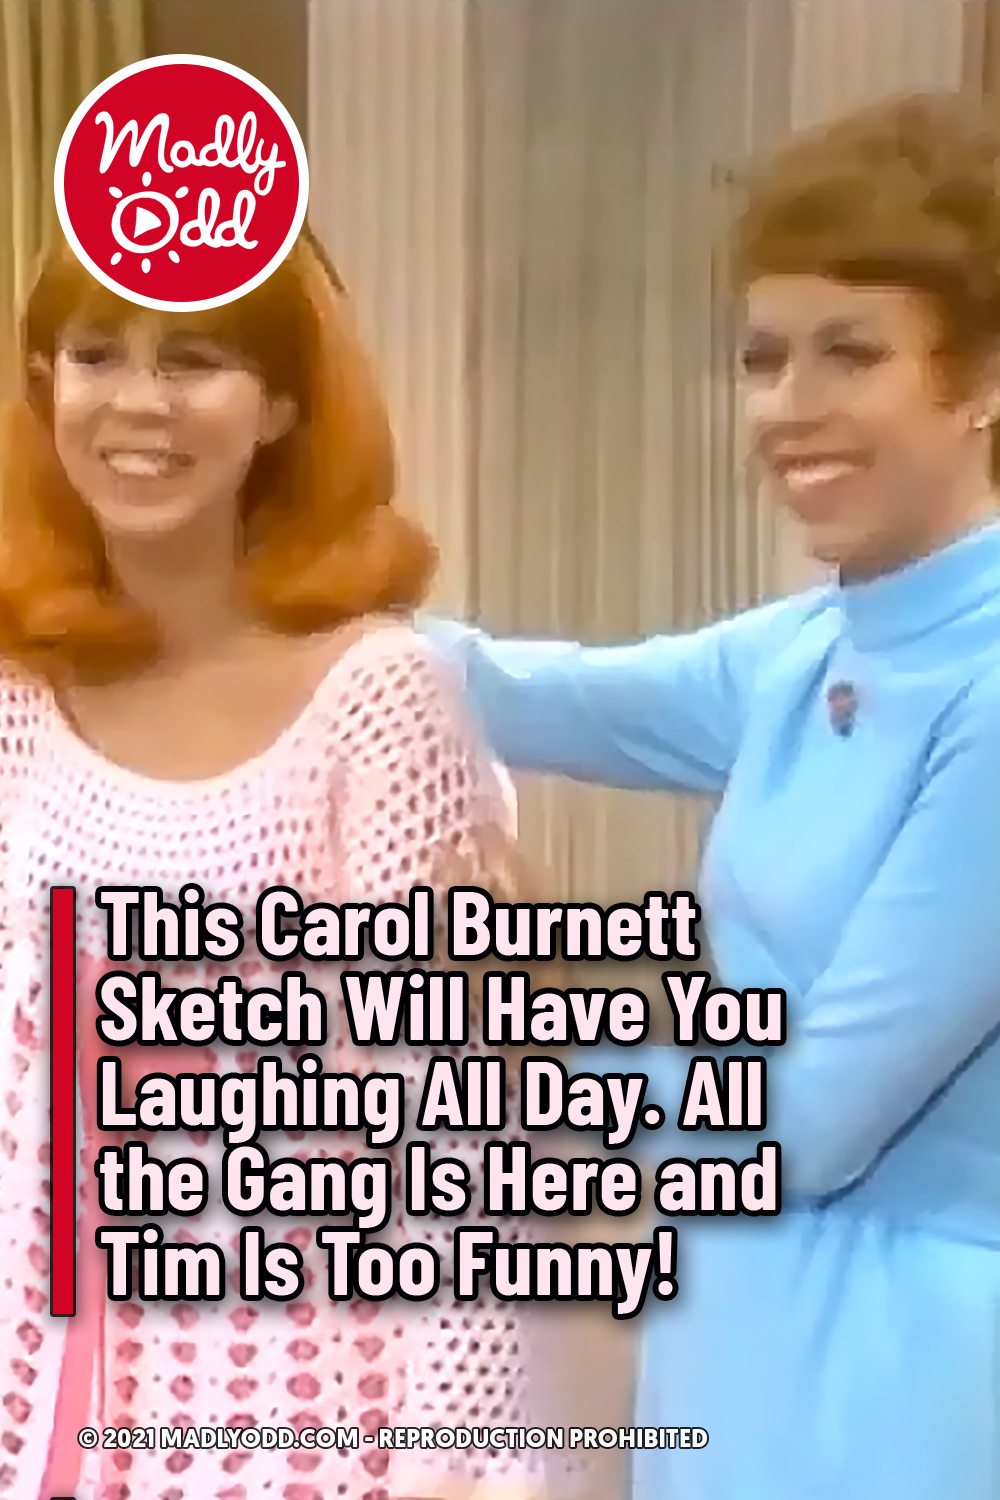 This Carol Burnett Sketch Will Have You Laughing All Day. All the Gang Is Here and Tim Is Too Funny!